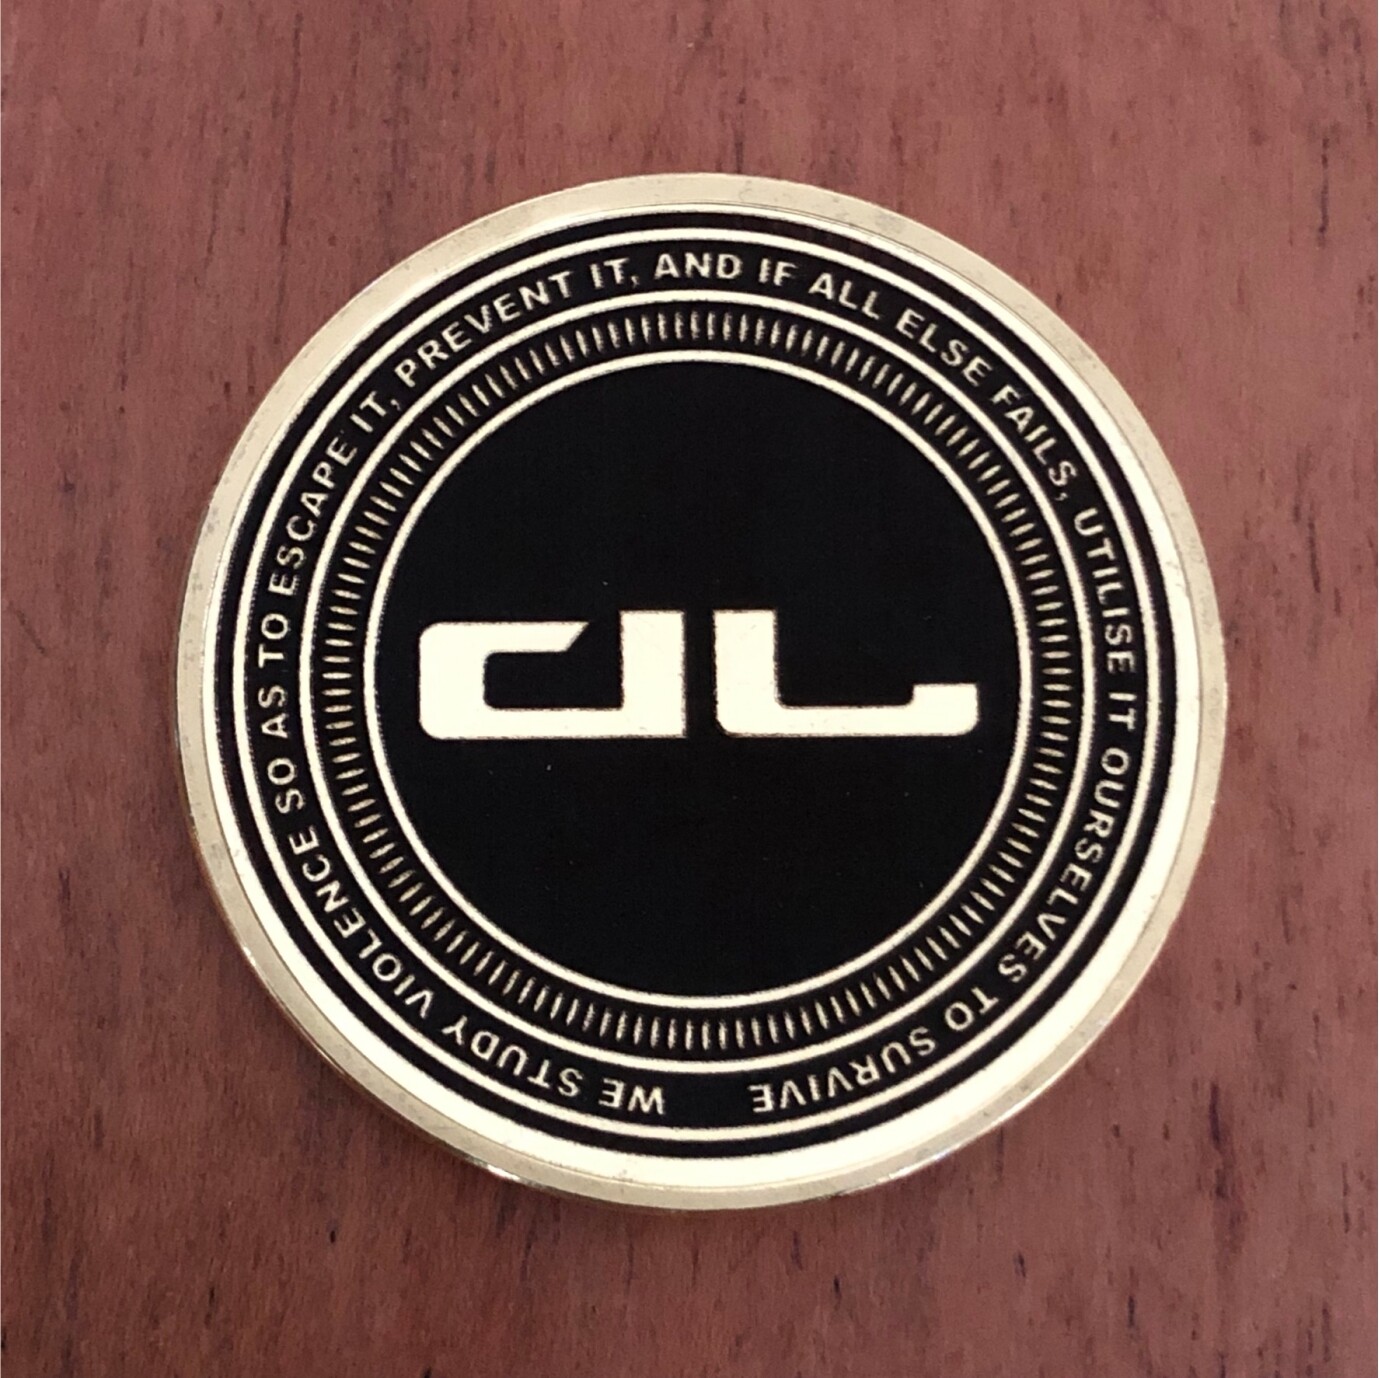 DL Collectable coin